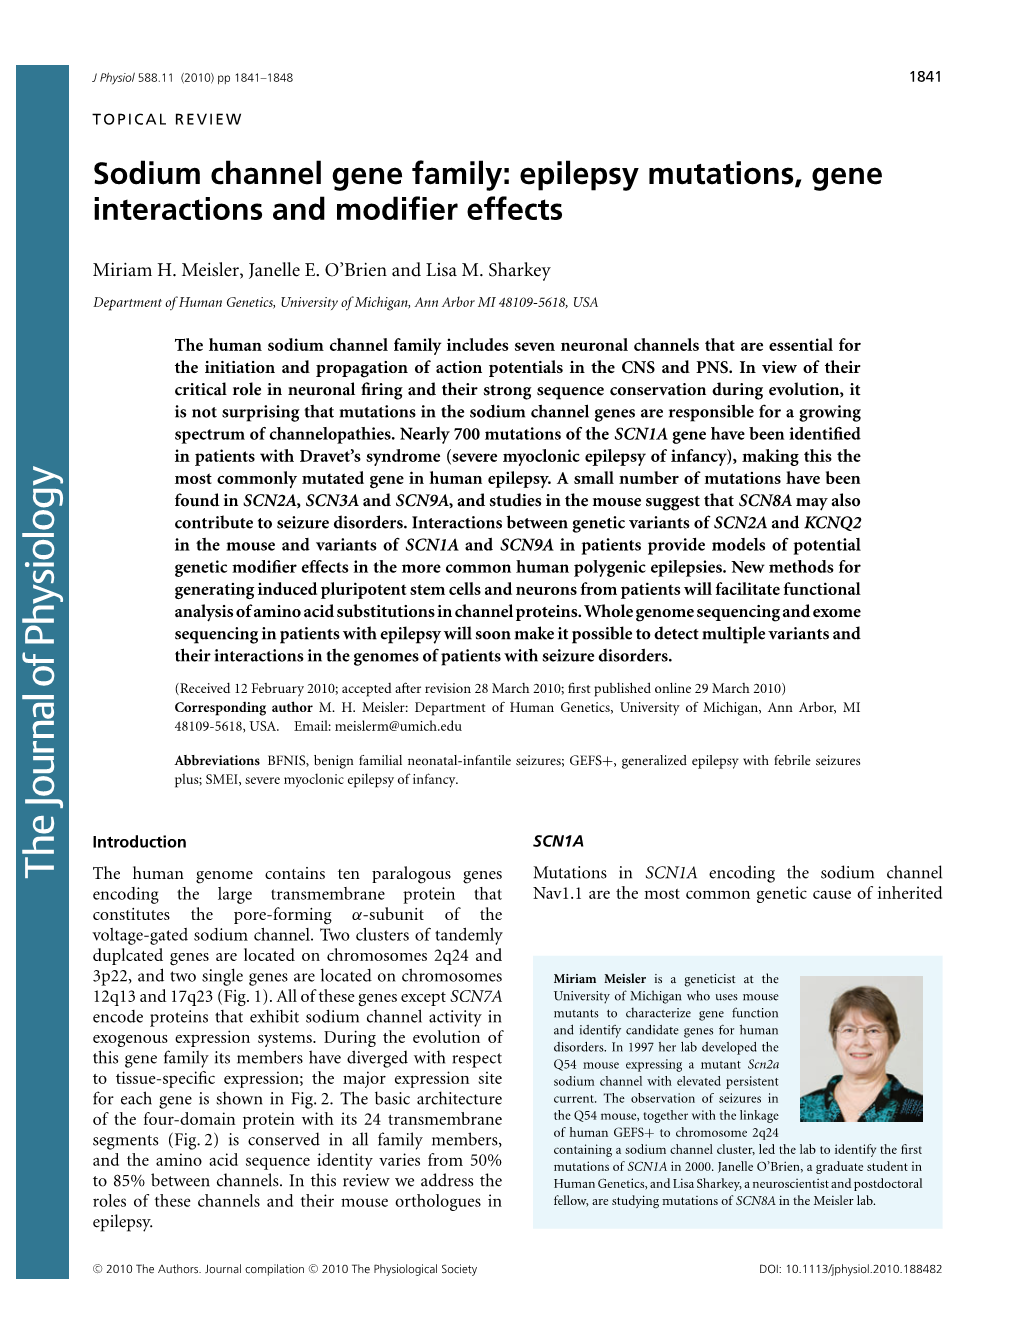 Sodium Channel Gene Family: Epilepsy Mutations, Gene Interactions and Modifier Effects